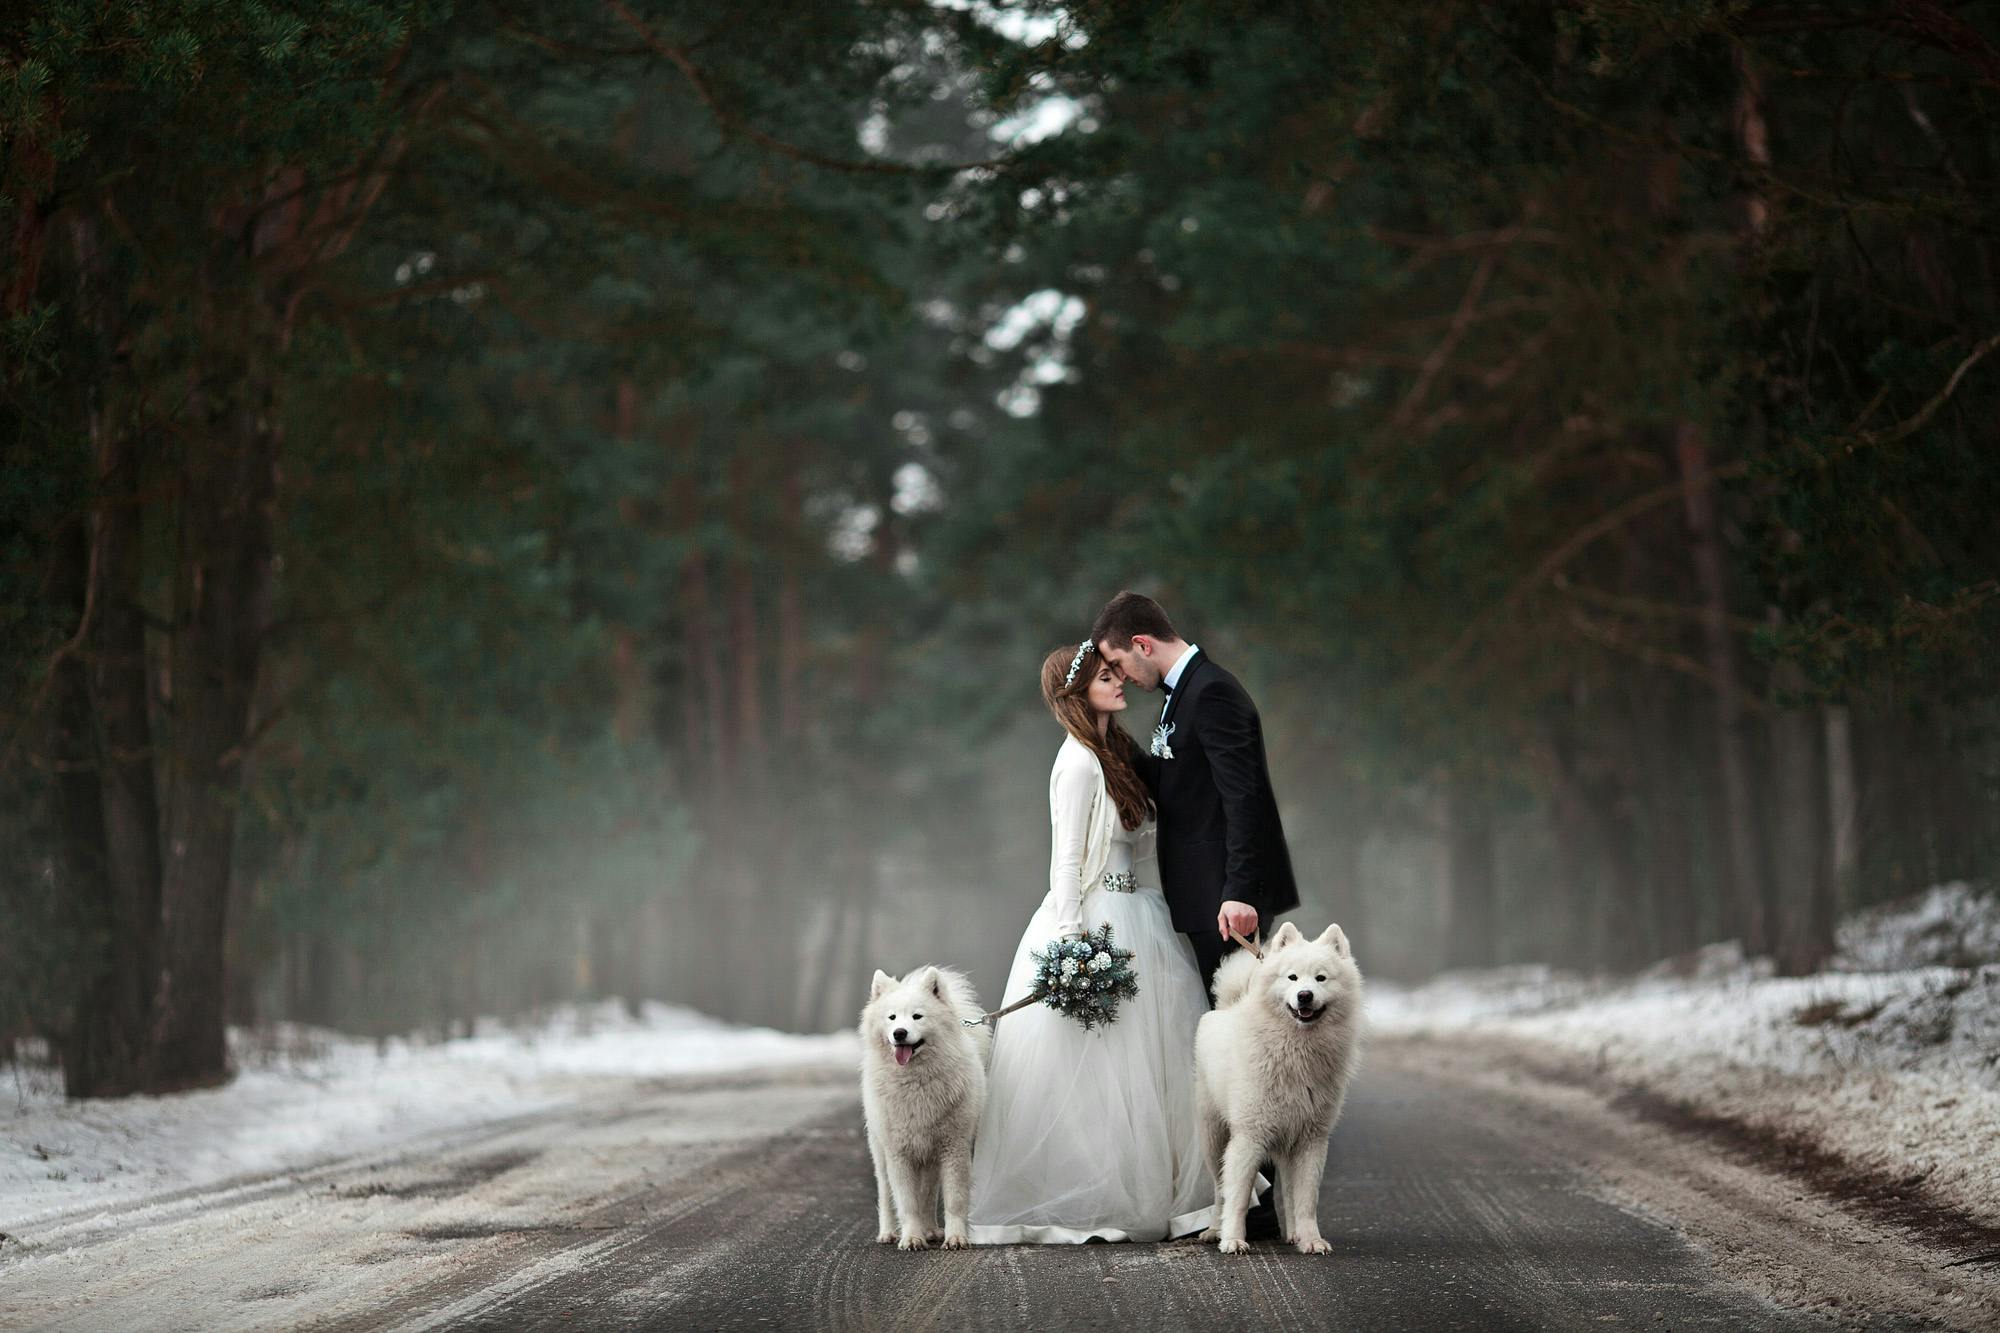 two dogs included with bride and groom wedding photo